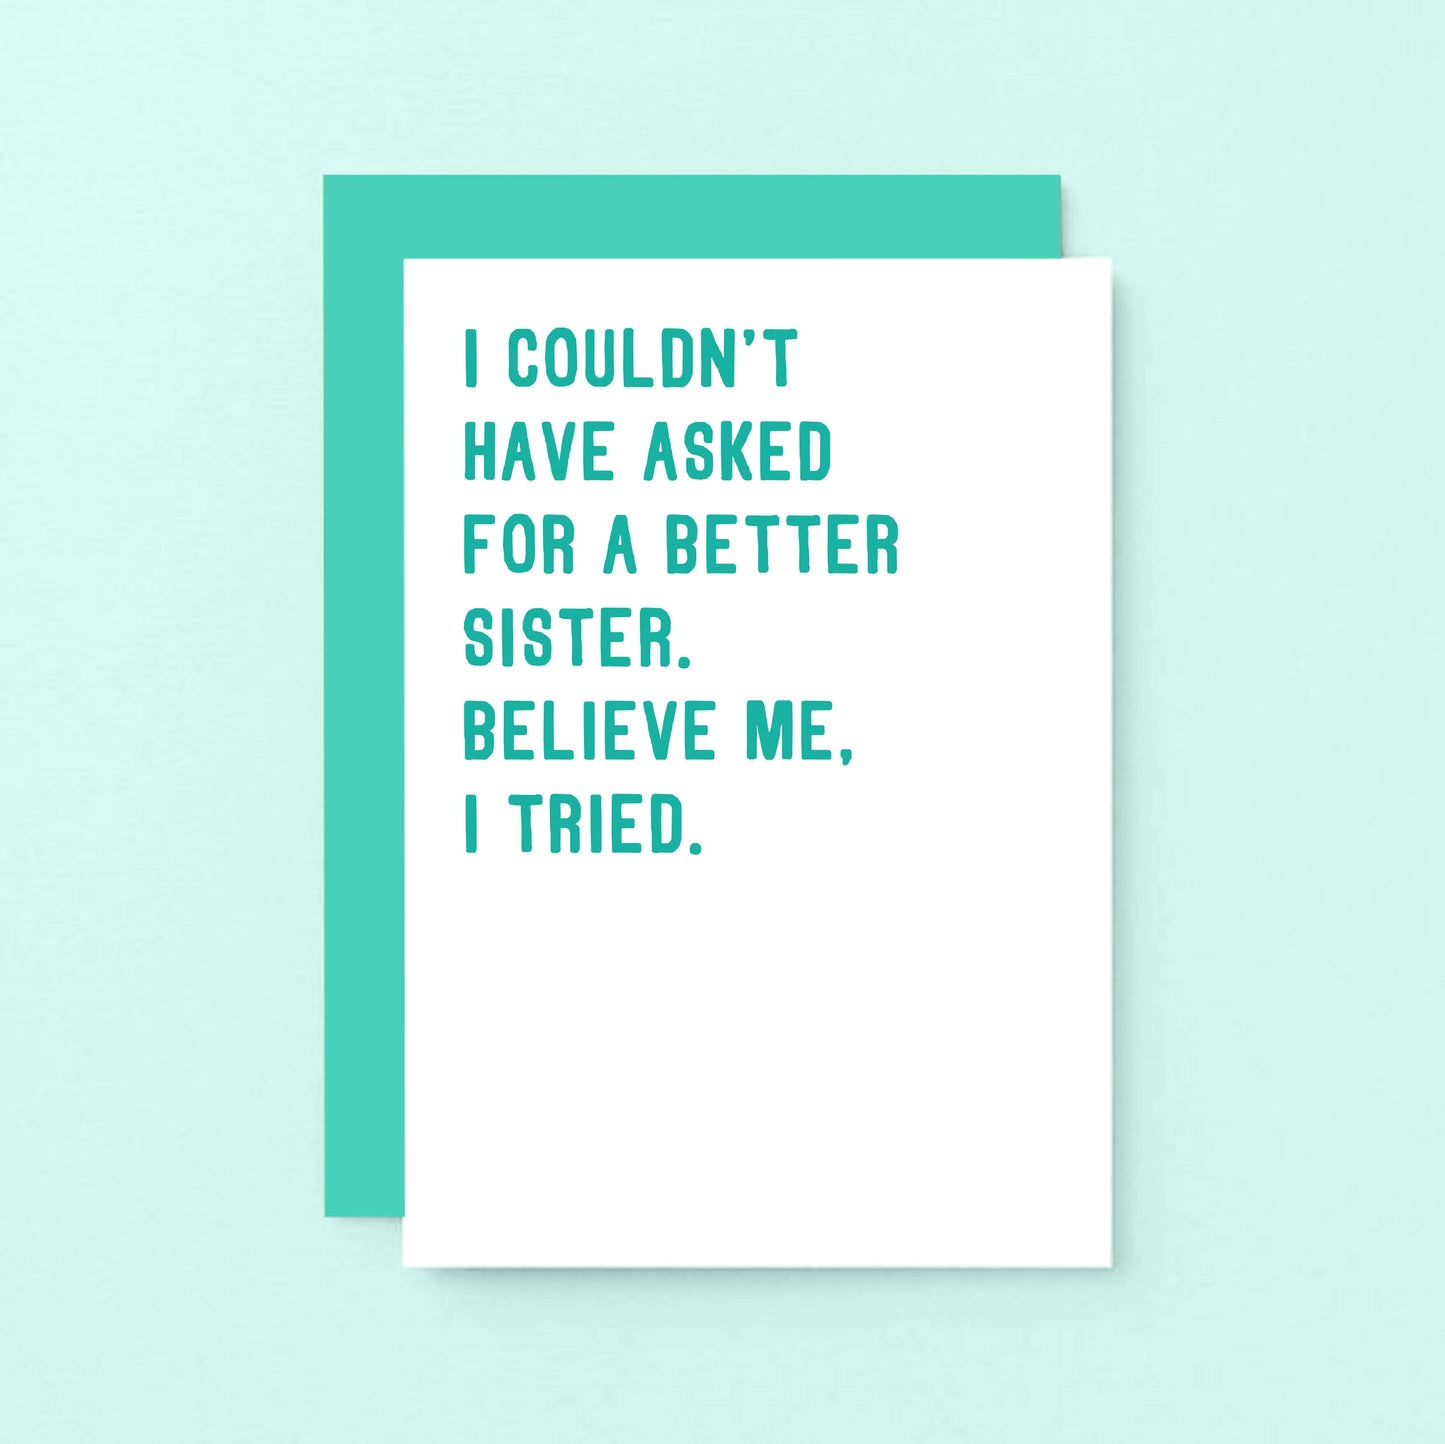 Sister Card by SixElevenCreations. Reads I couldn't have asked for a better sister. Believe me, I tried. Product Code SE2047A6